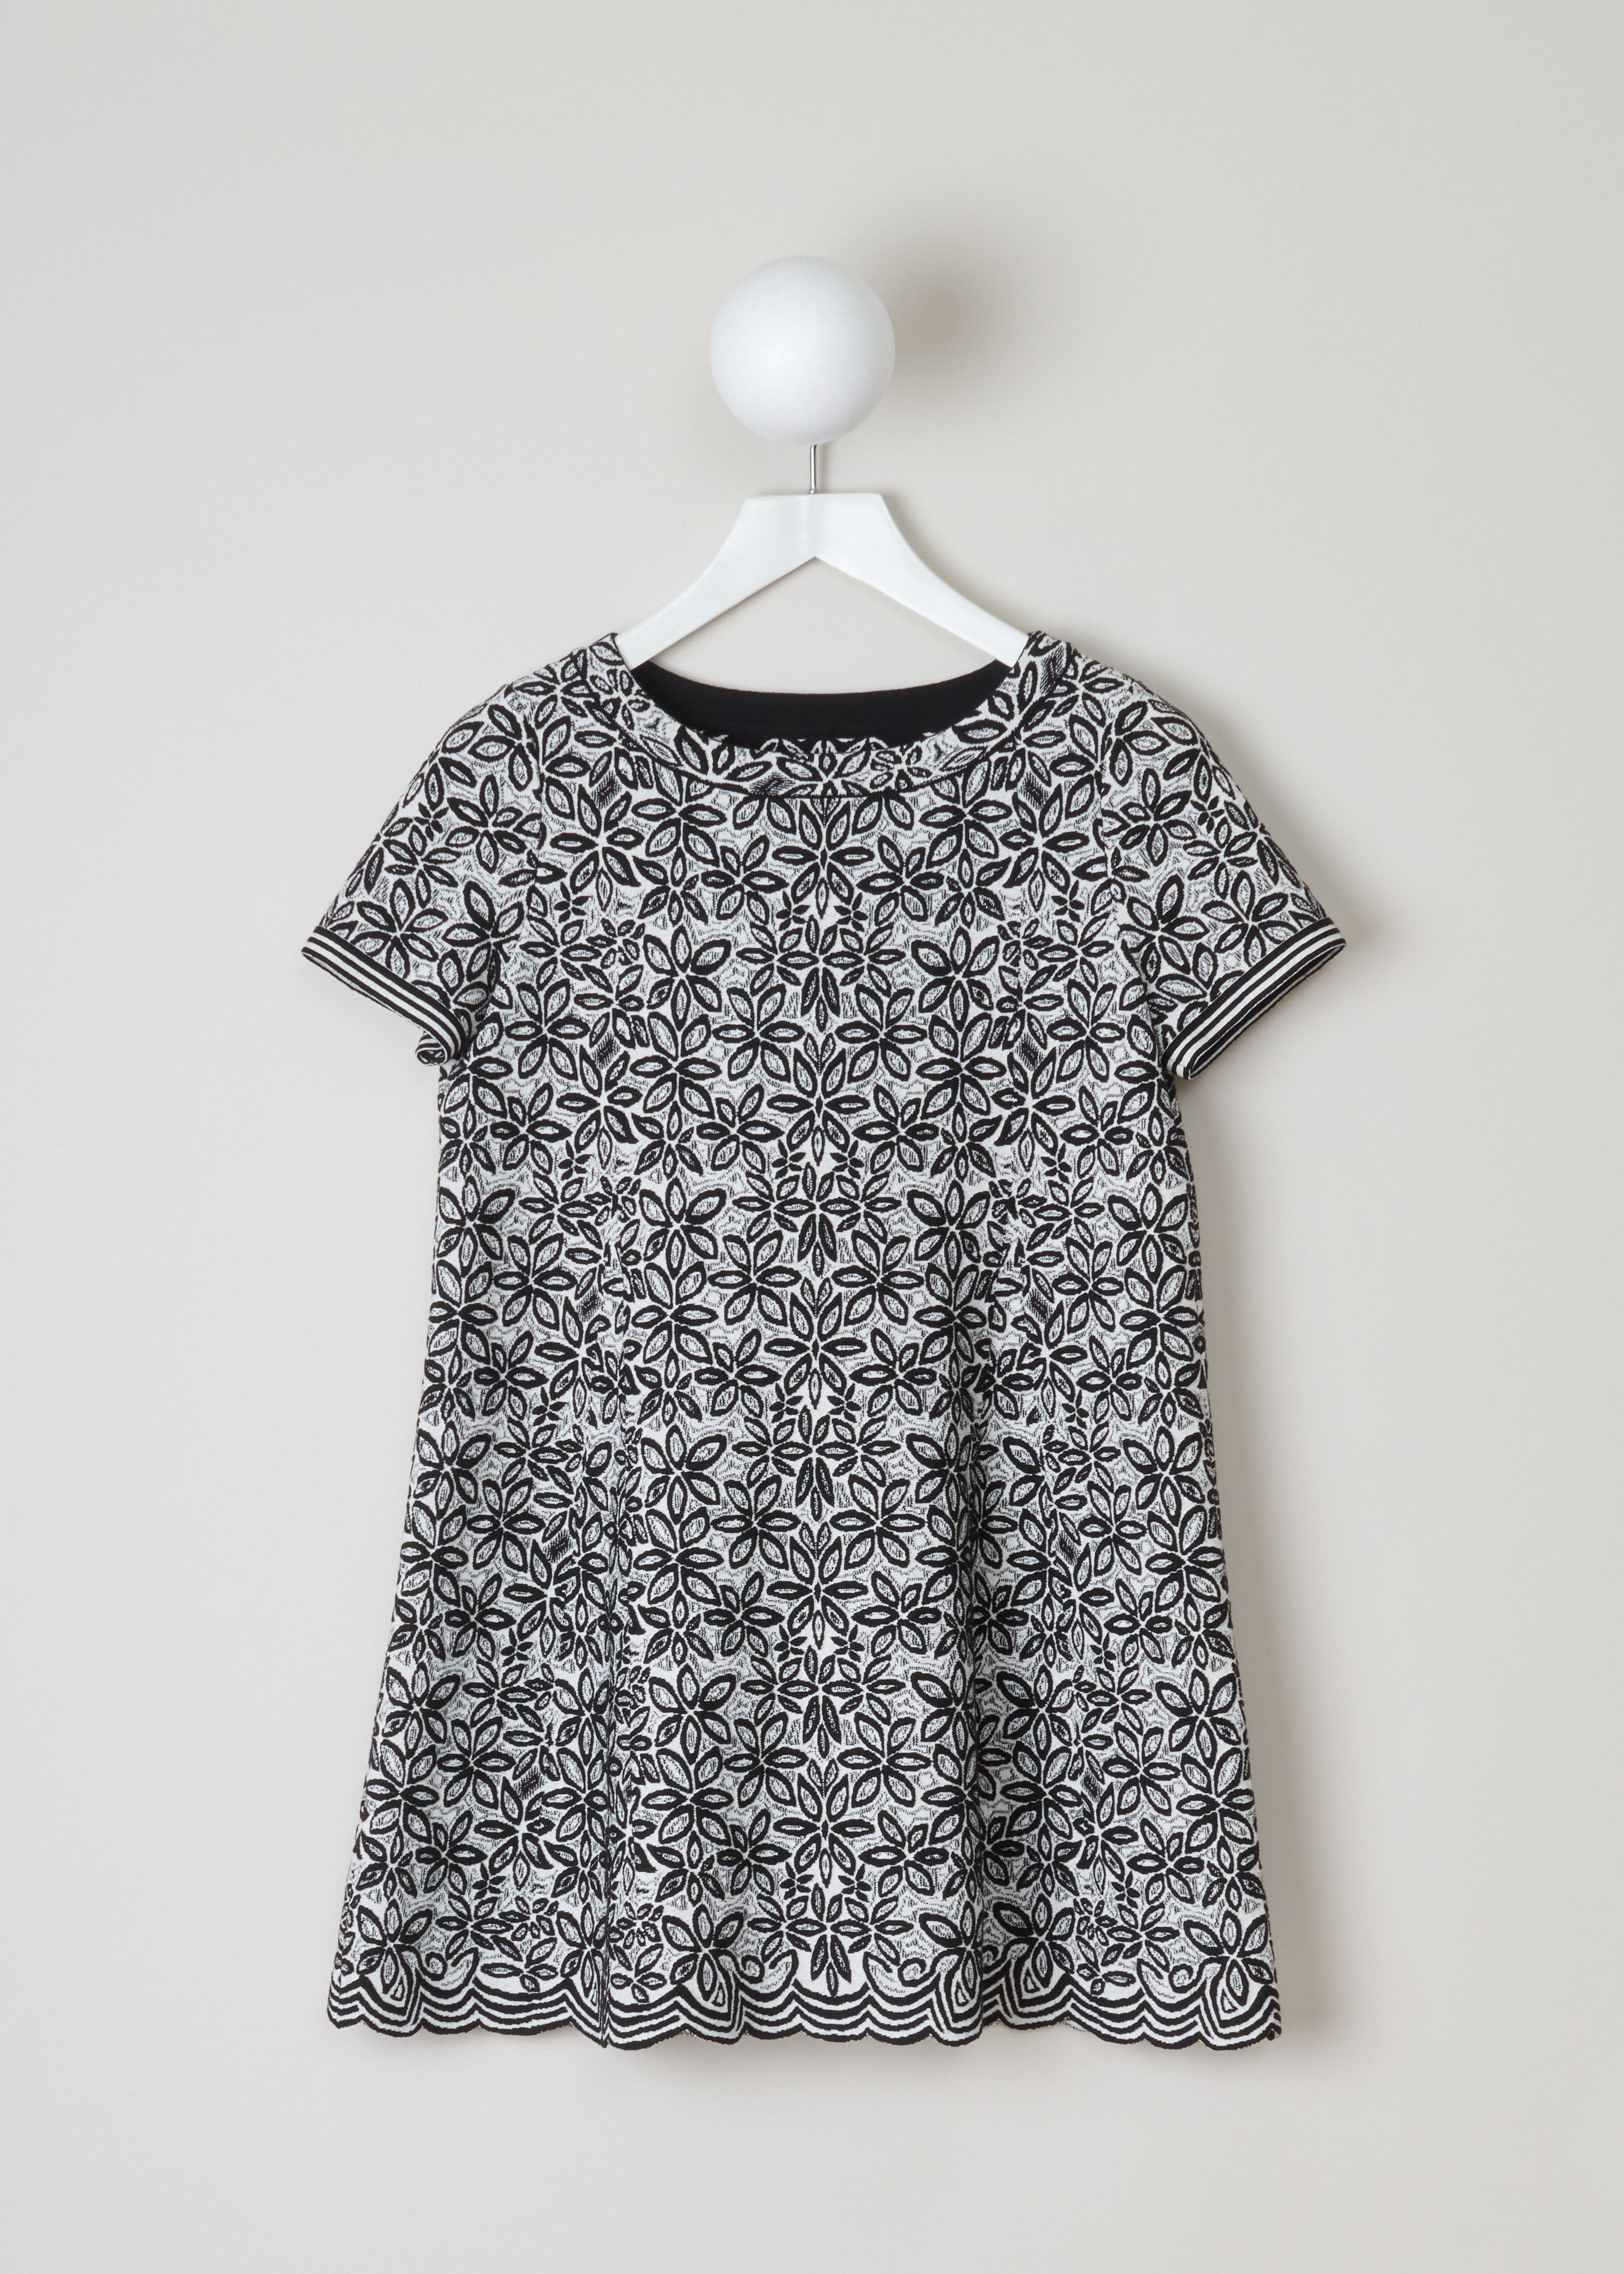 AlaÃ¯a, Wool-blend tunic with a flower pattern, 7W9UE52RM353_TUNIQUE_ADENIUM_C009_Blanc/Noir, Grey, Print, Front, Jacquard knitted tunic with a black and white flower motif. The dress has short sleeves, a wide round neckline, an A-line silhouette and scalloped hems.

